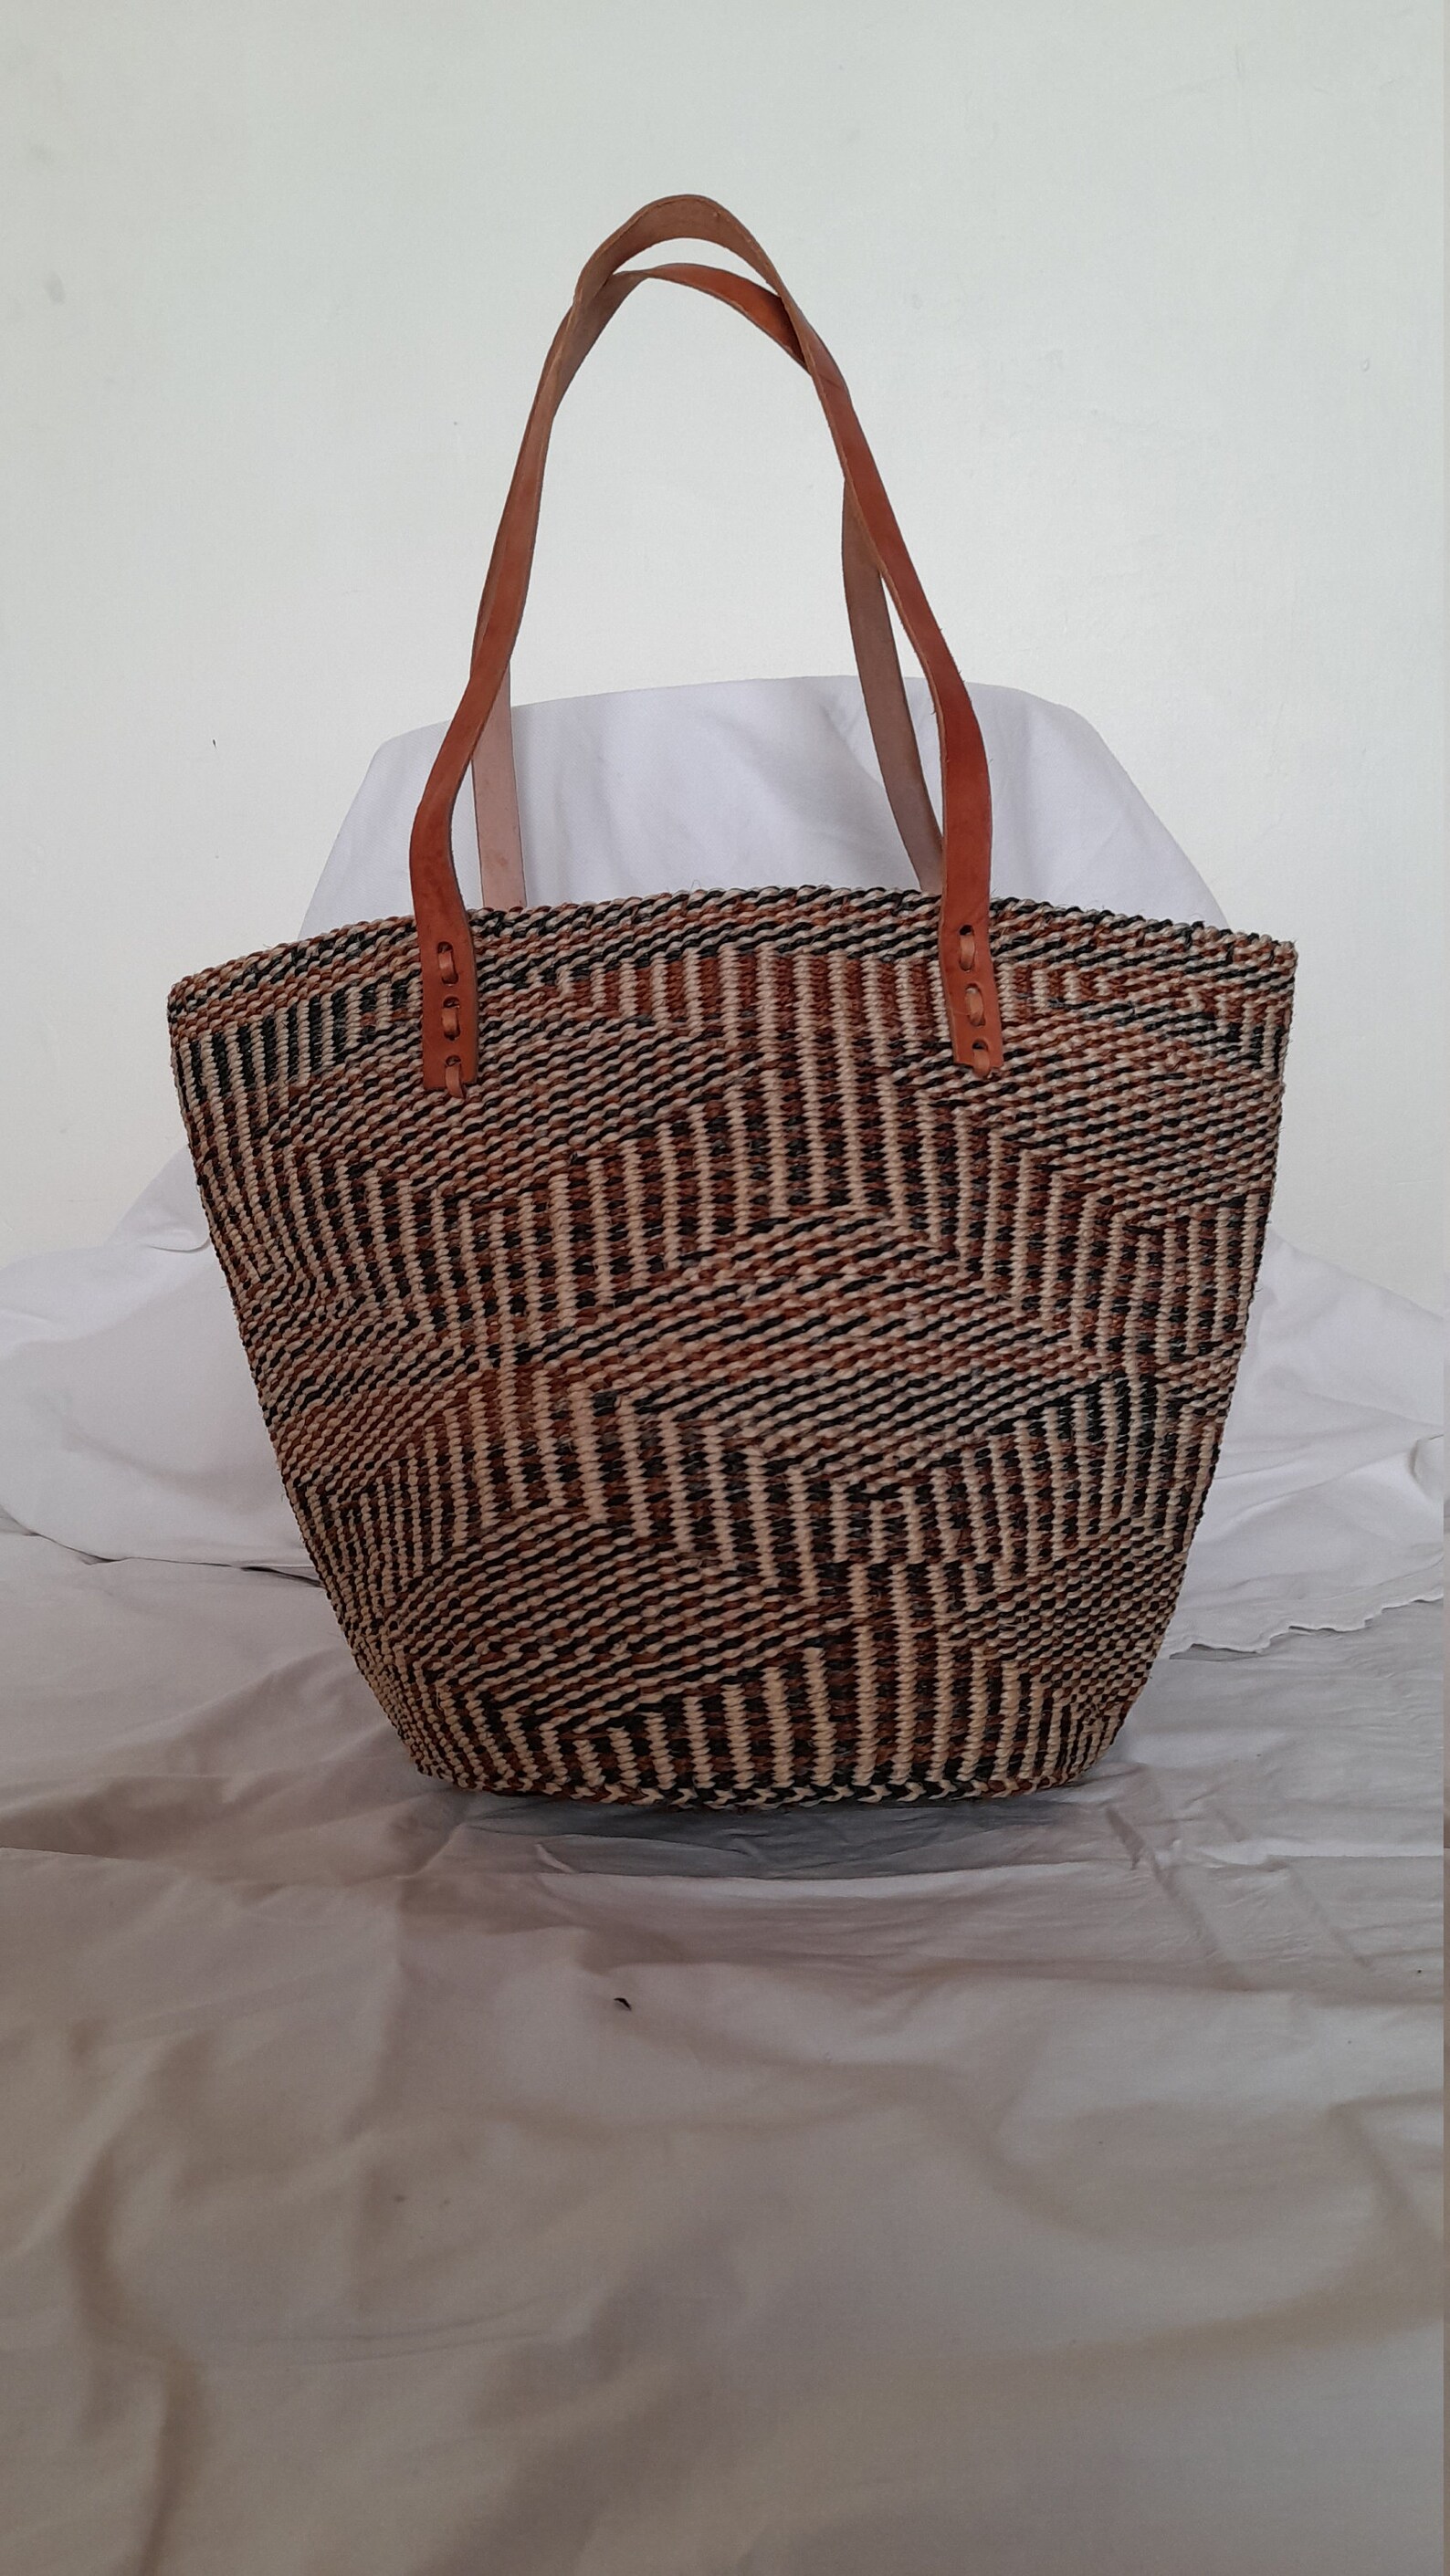 Hand Woven Sisal Tote Bag in Natural Color. | Etsy